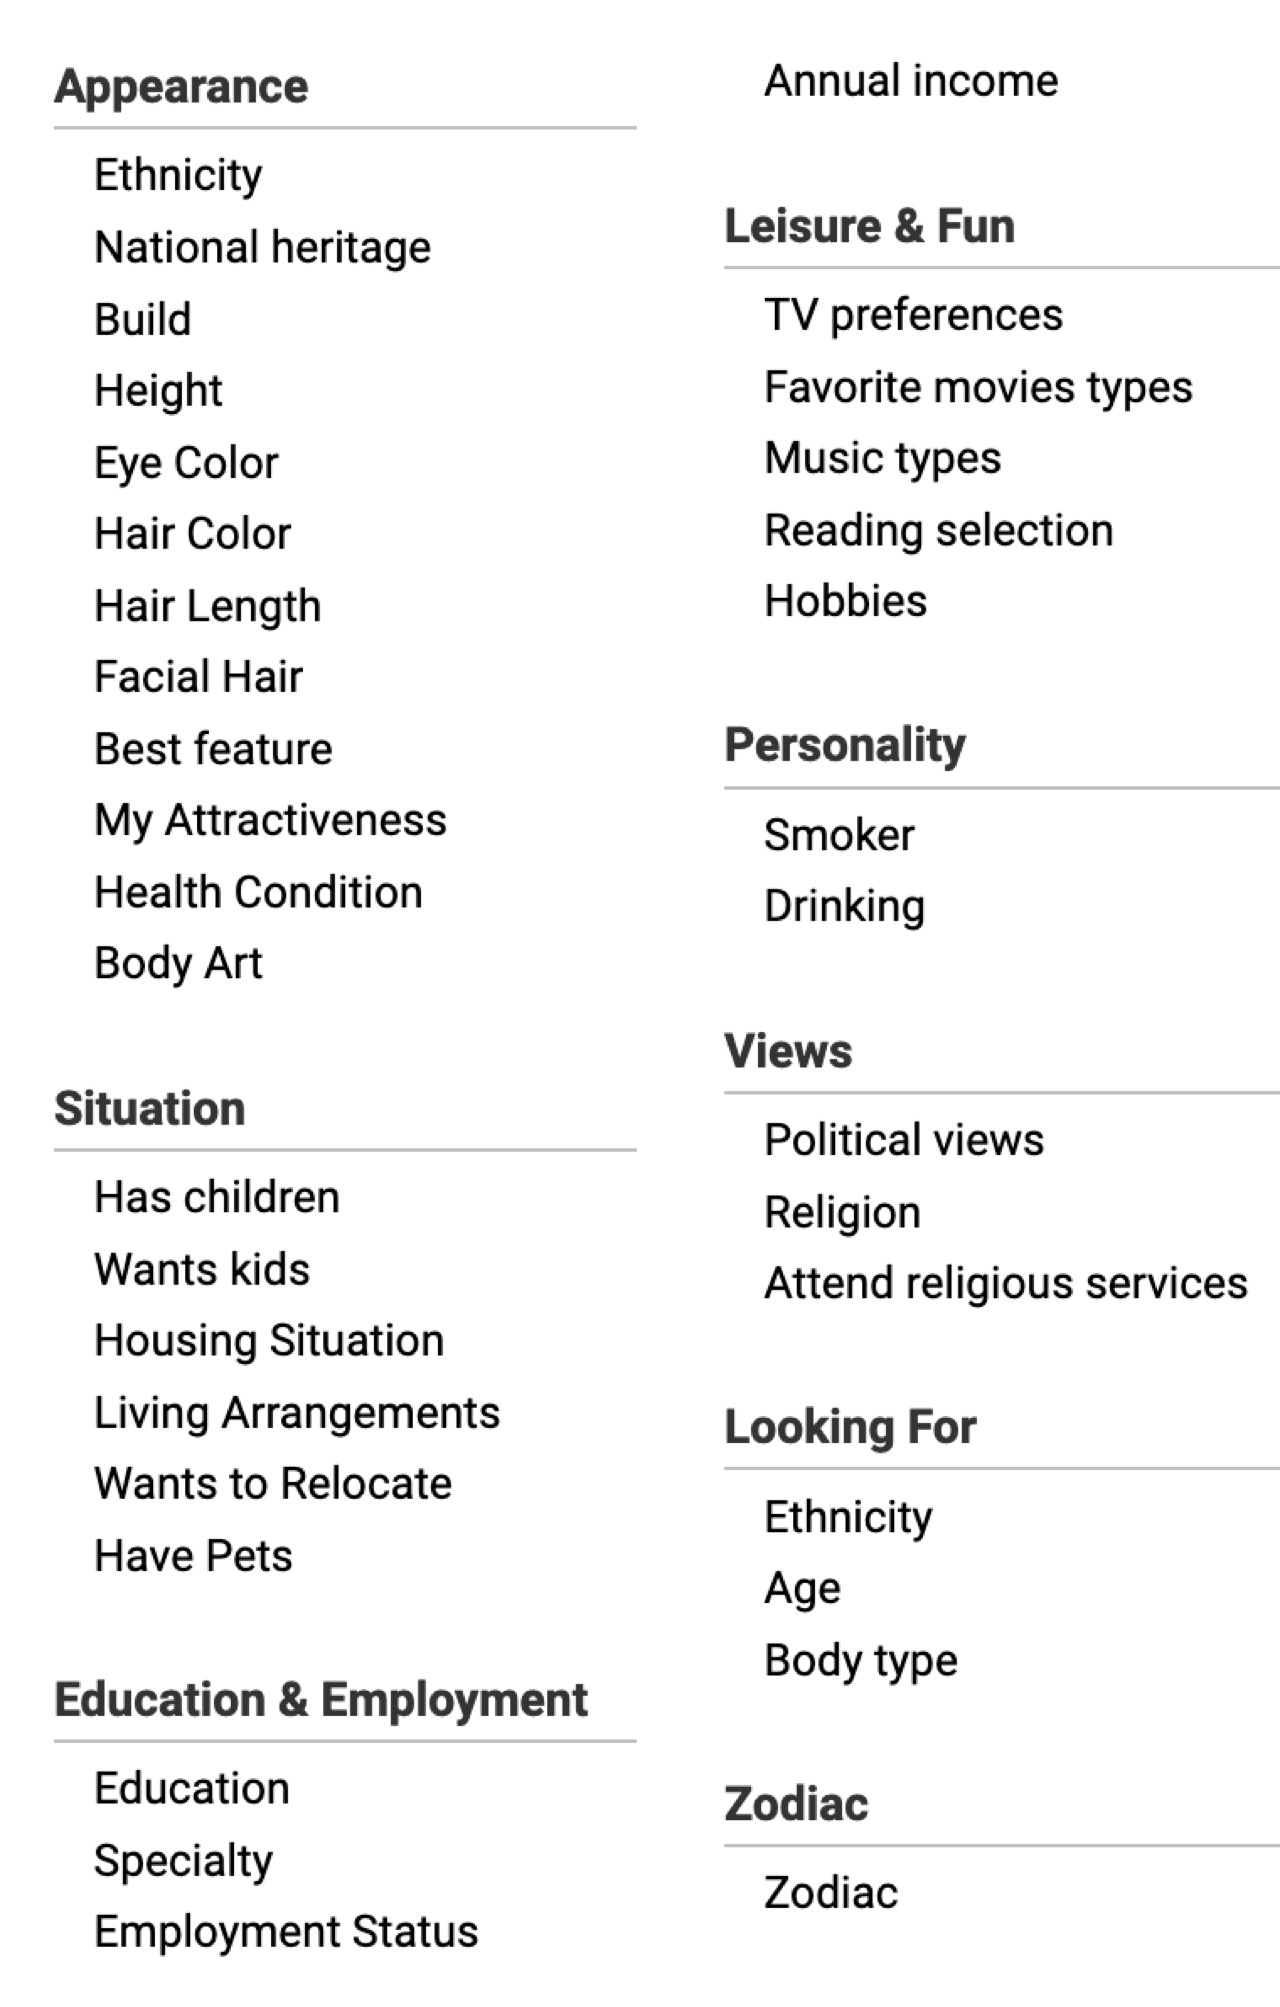 geek-nerd-dating-review-advanced-search-options